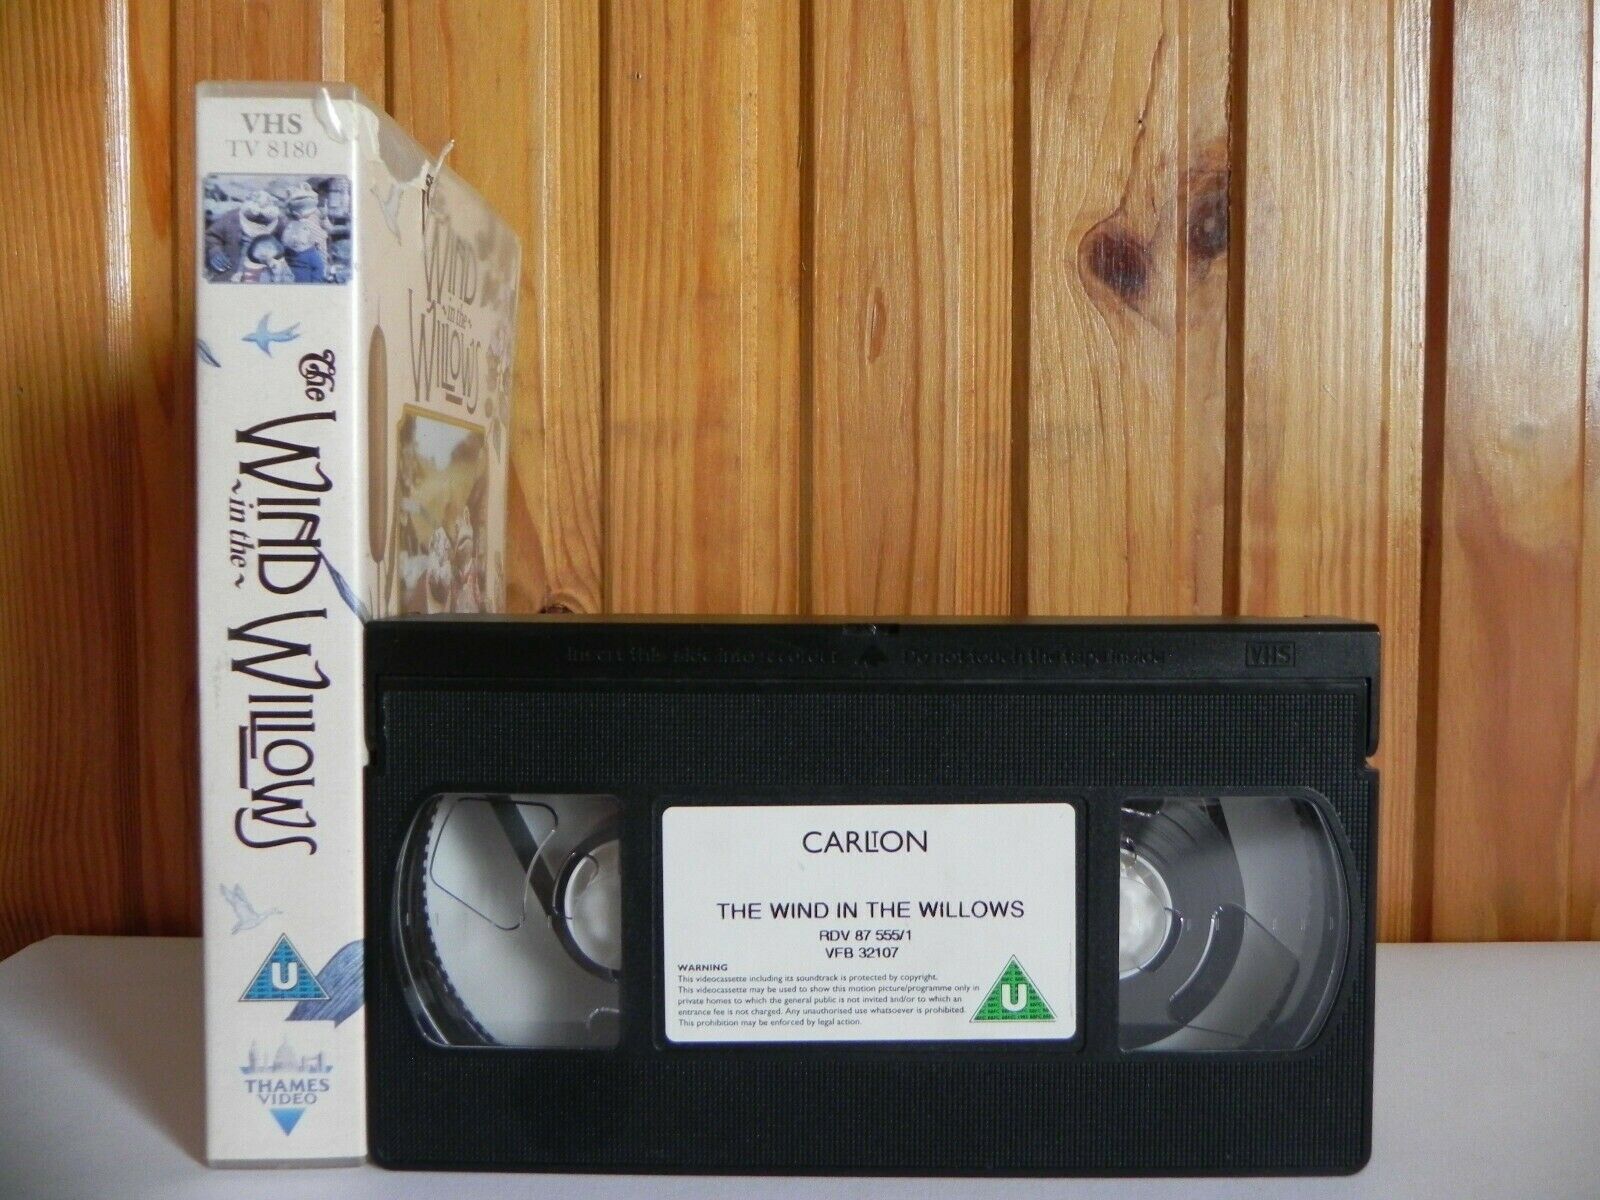 The Wind In The Willows - Thames Video - Children's Classic - Animated - Pal VHS-